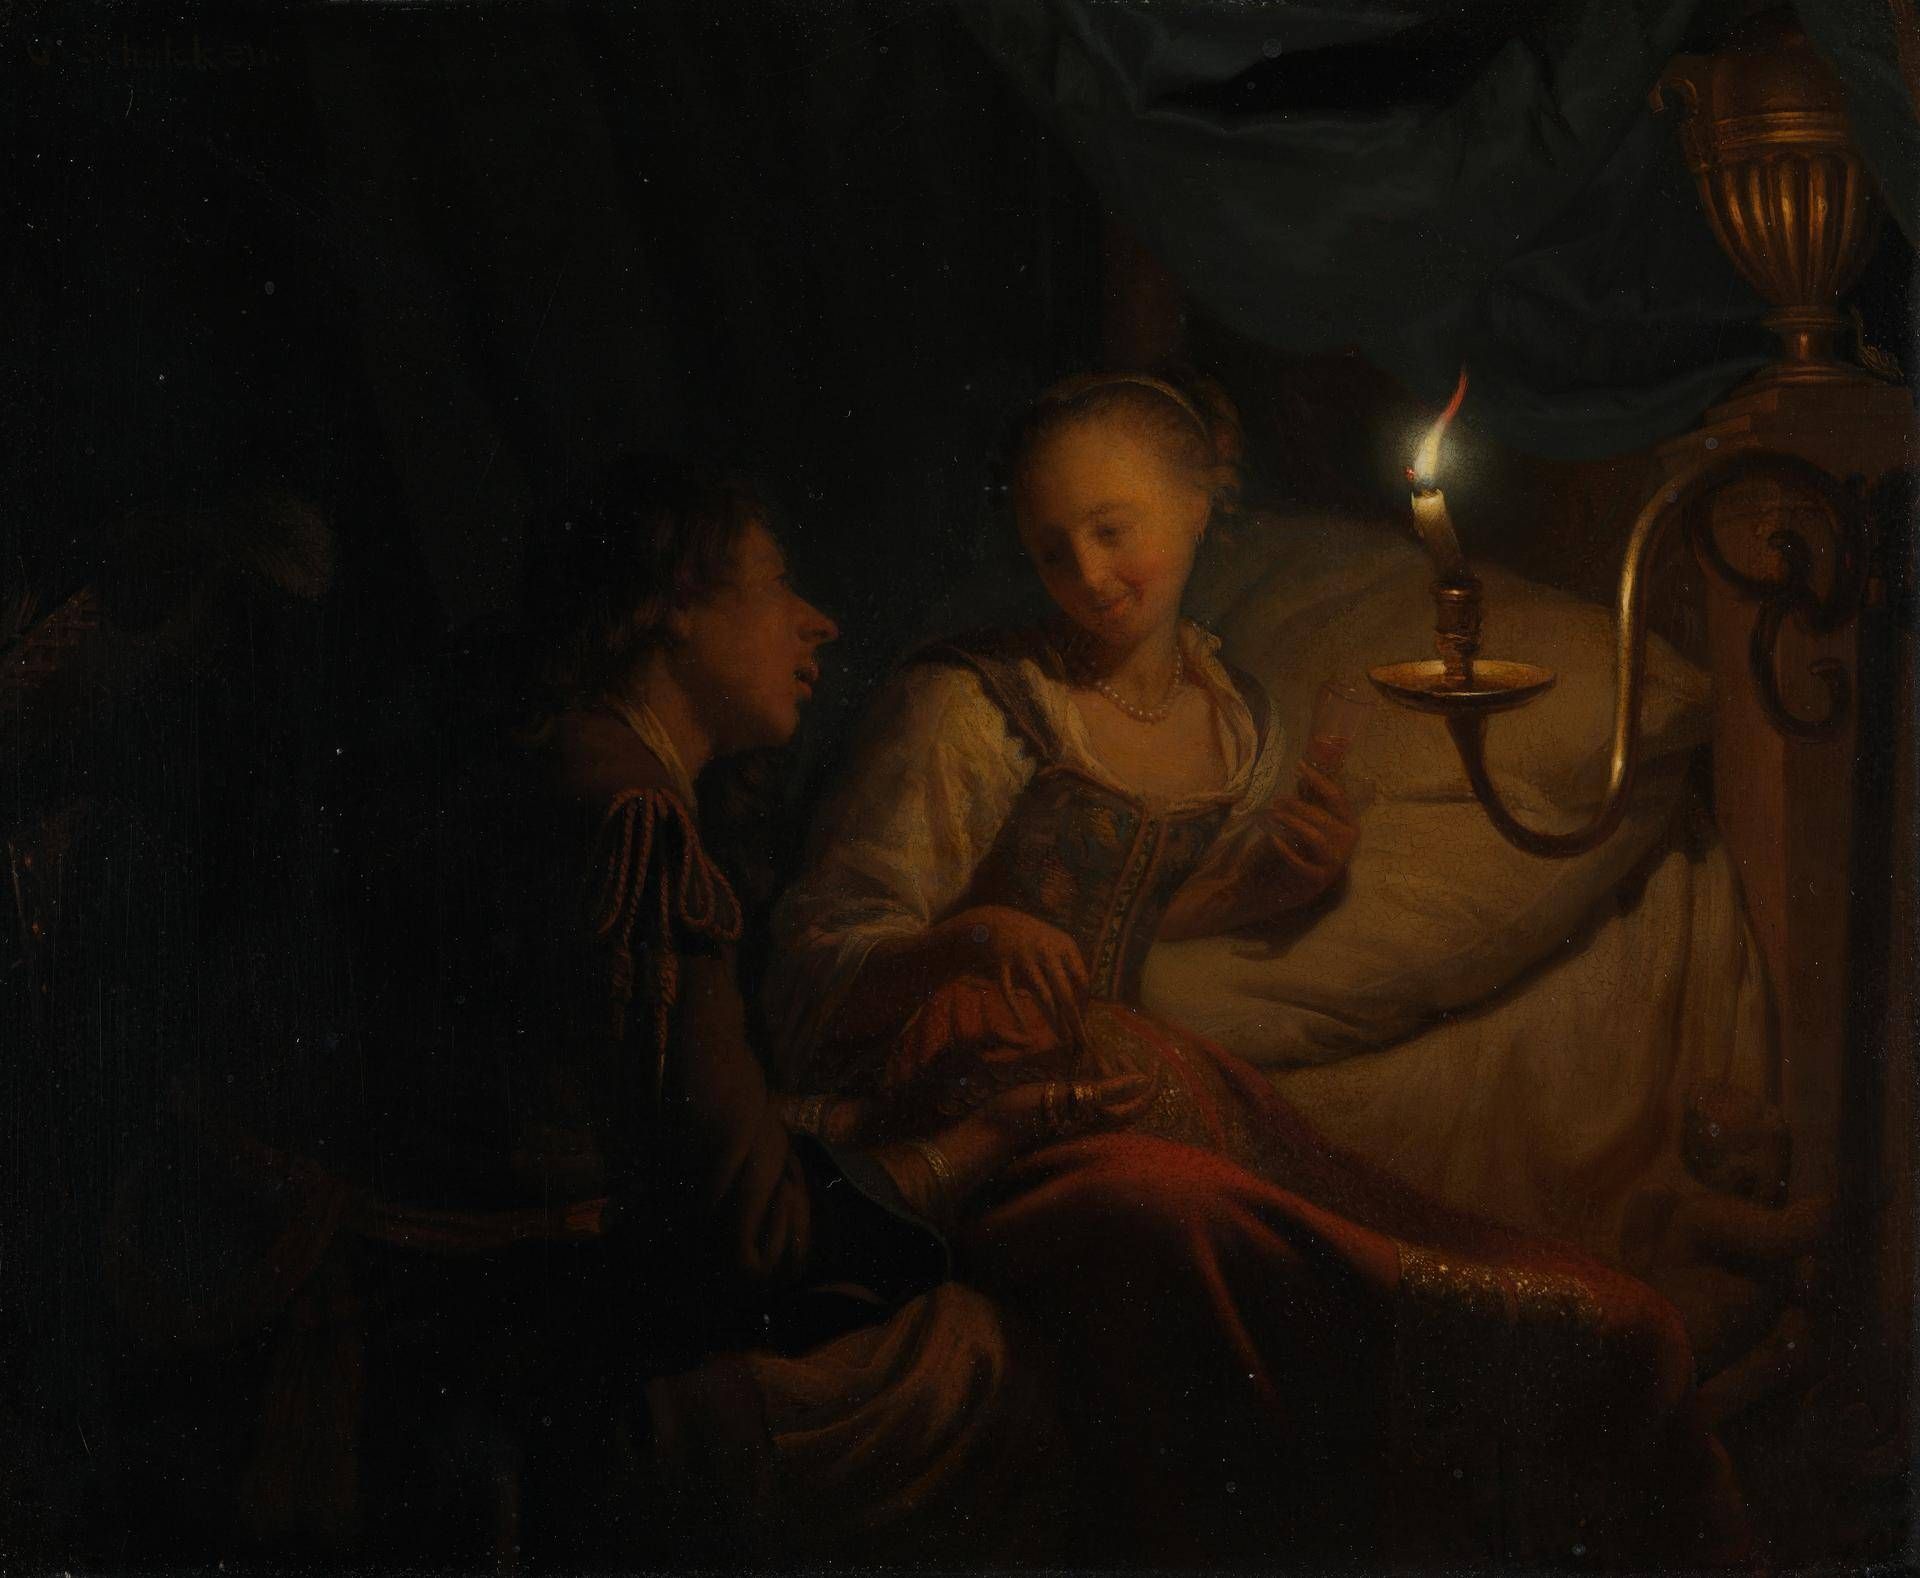 A Candlelight Scene: A Man offering a Gold Chain and Coins to a Girl seated on a Bed